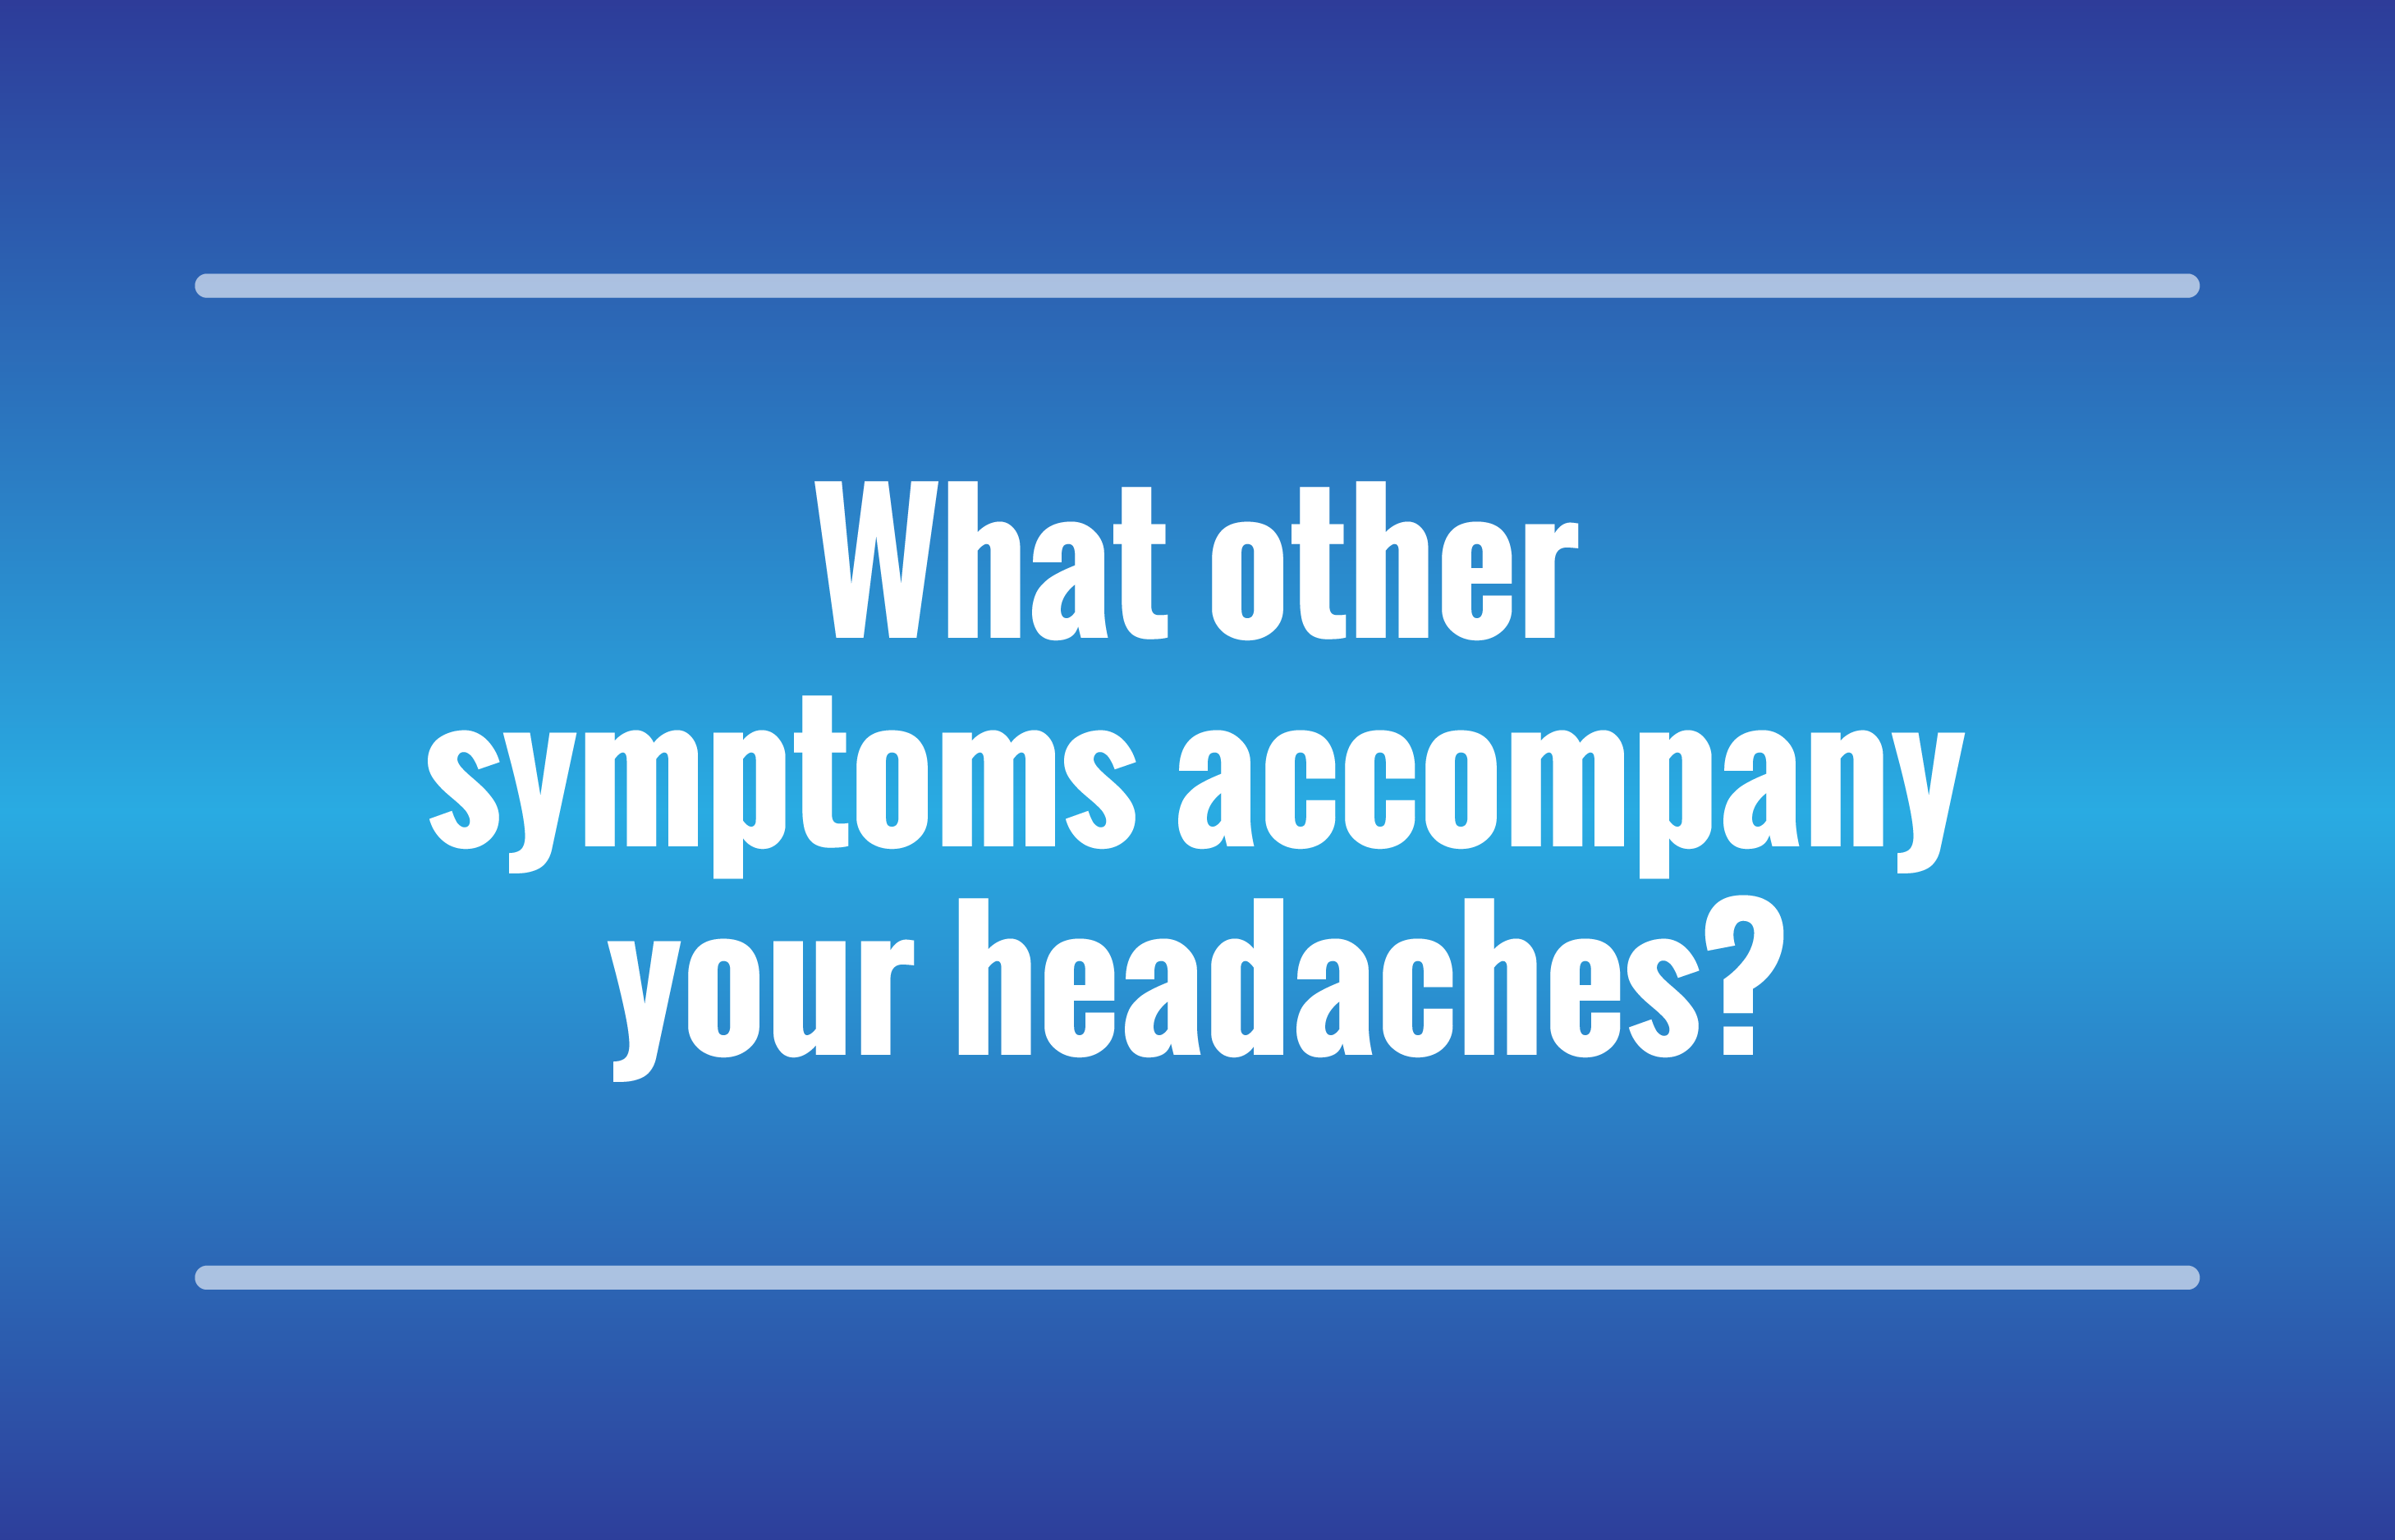 What other symptoms accompany your headaches?